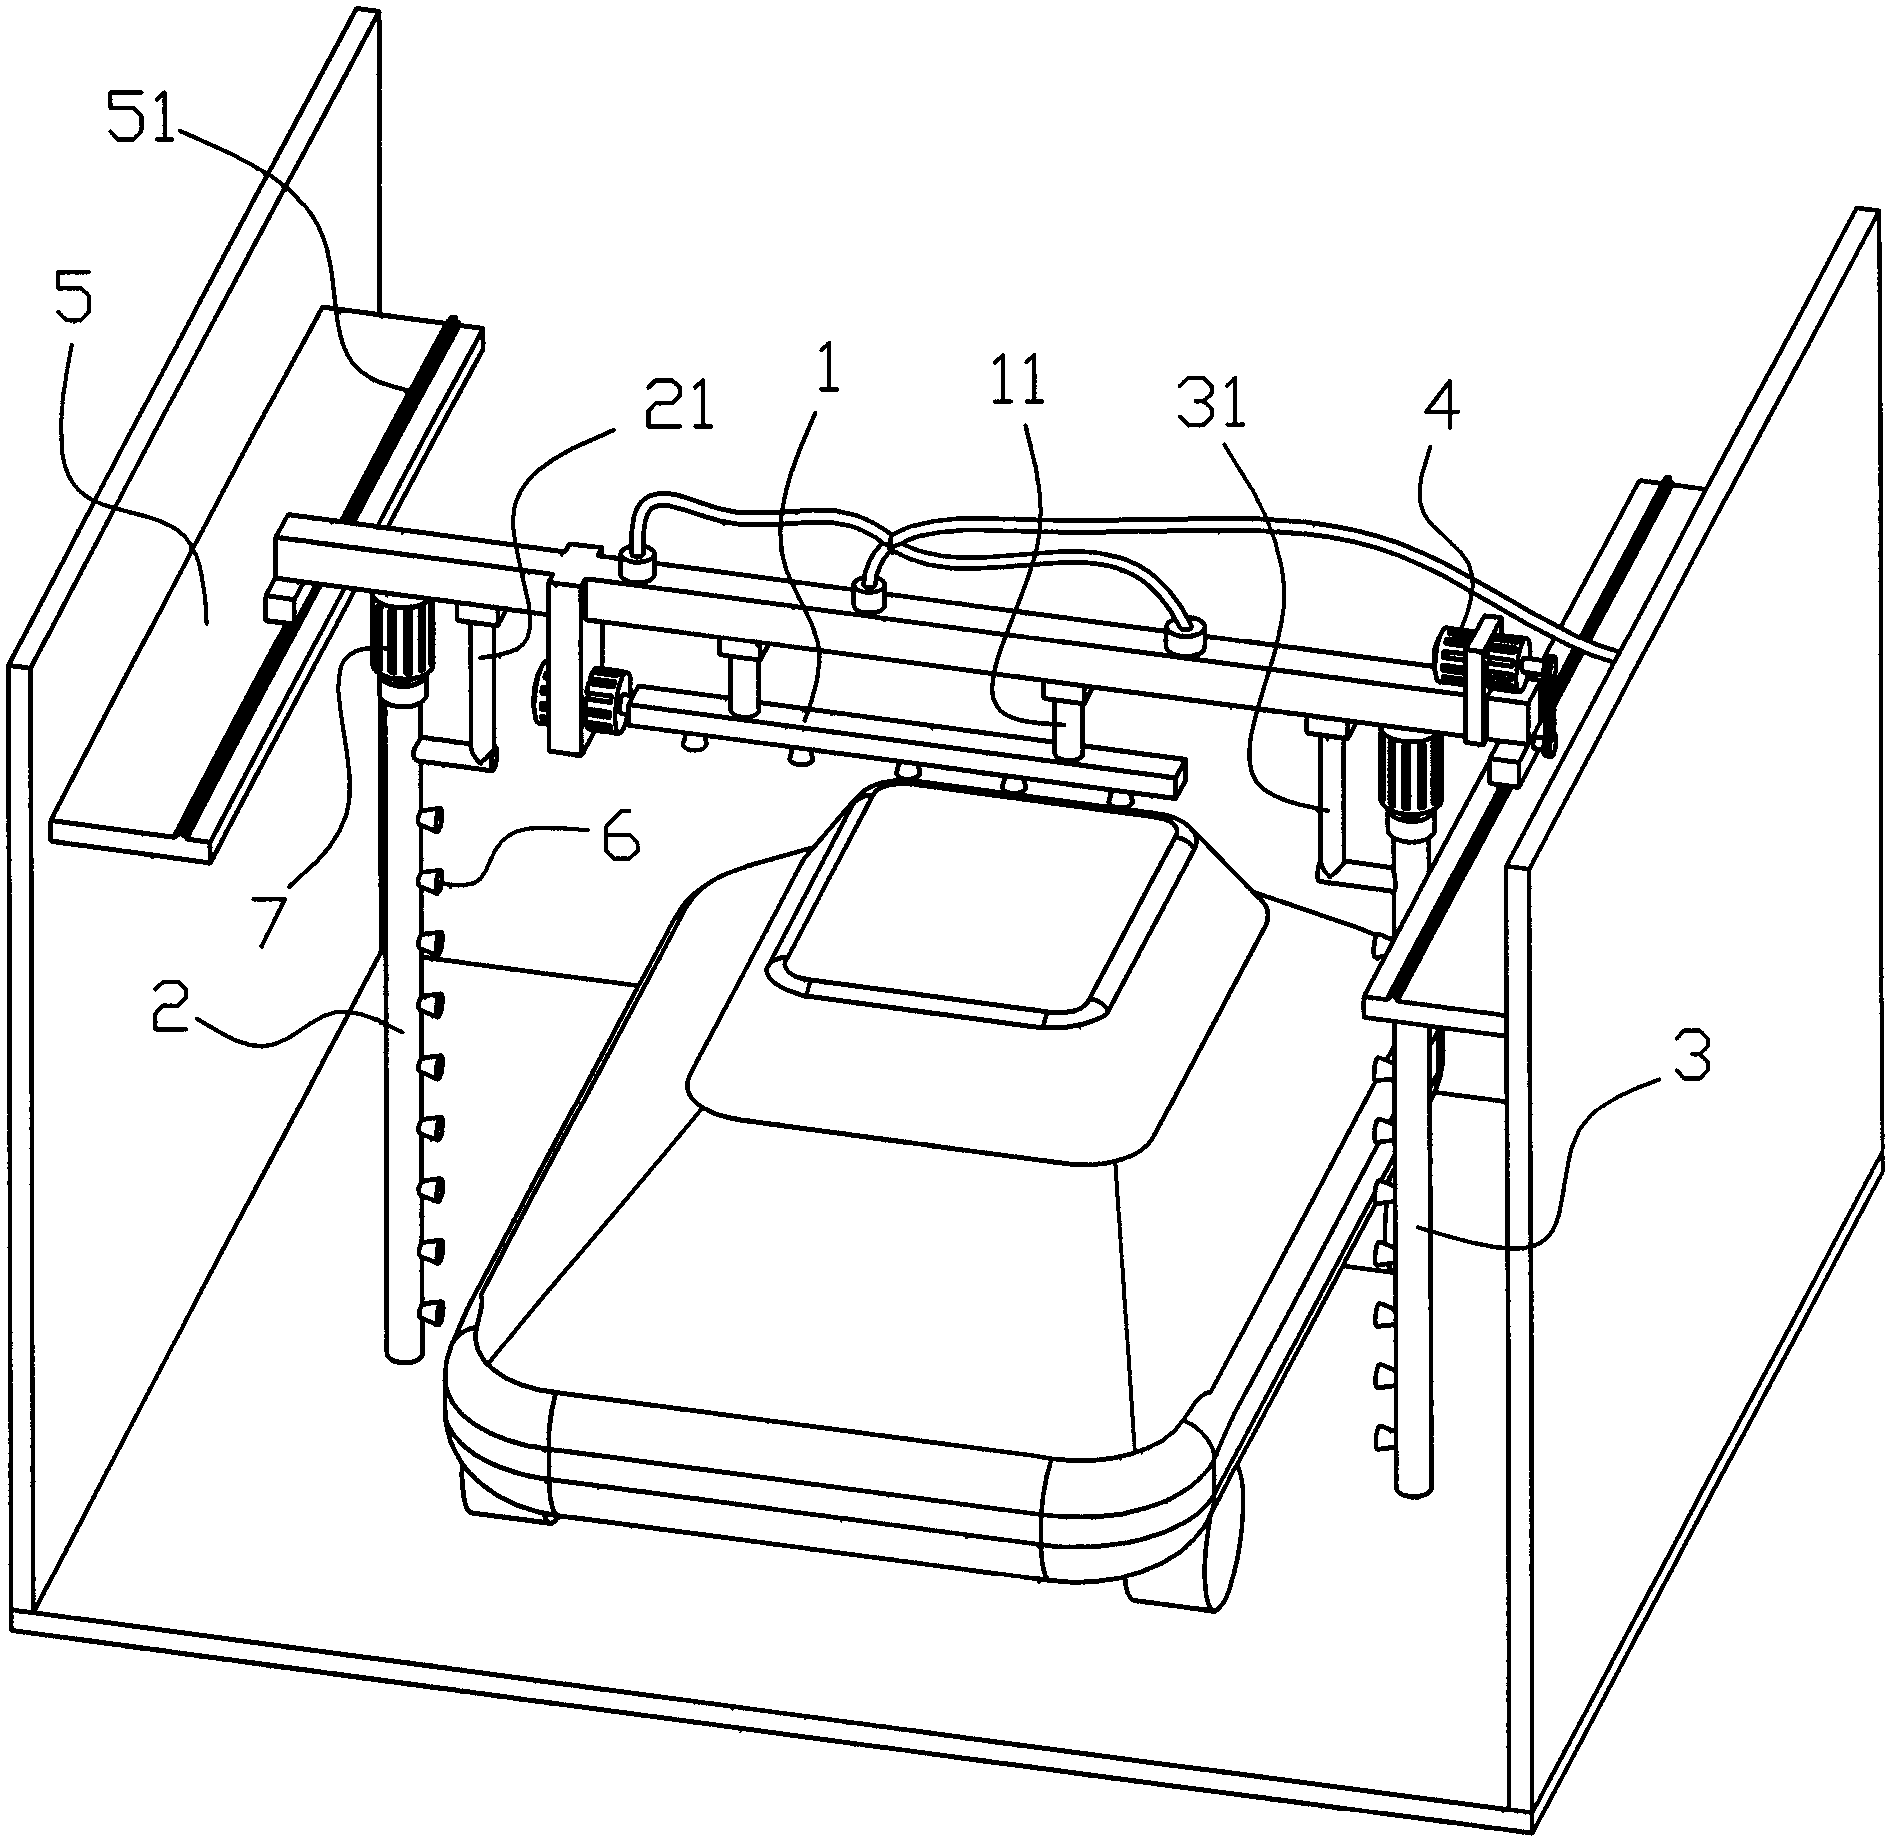 Automobile cleaning device